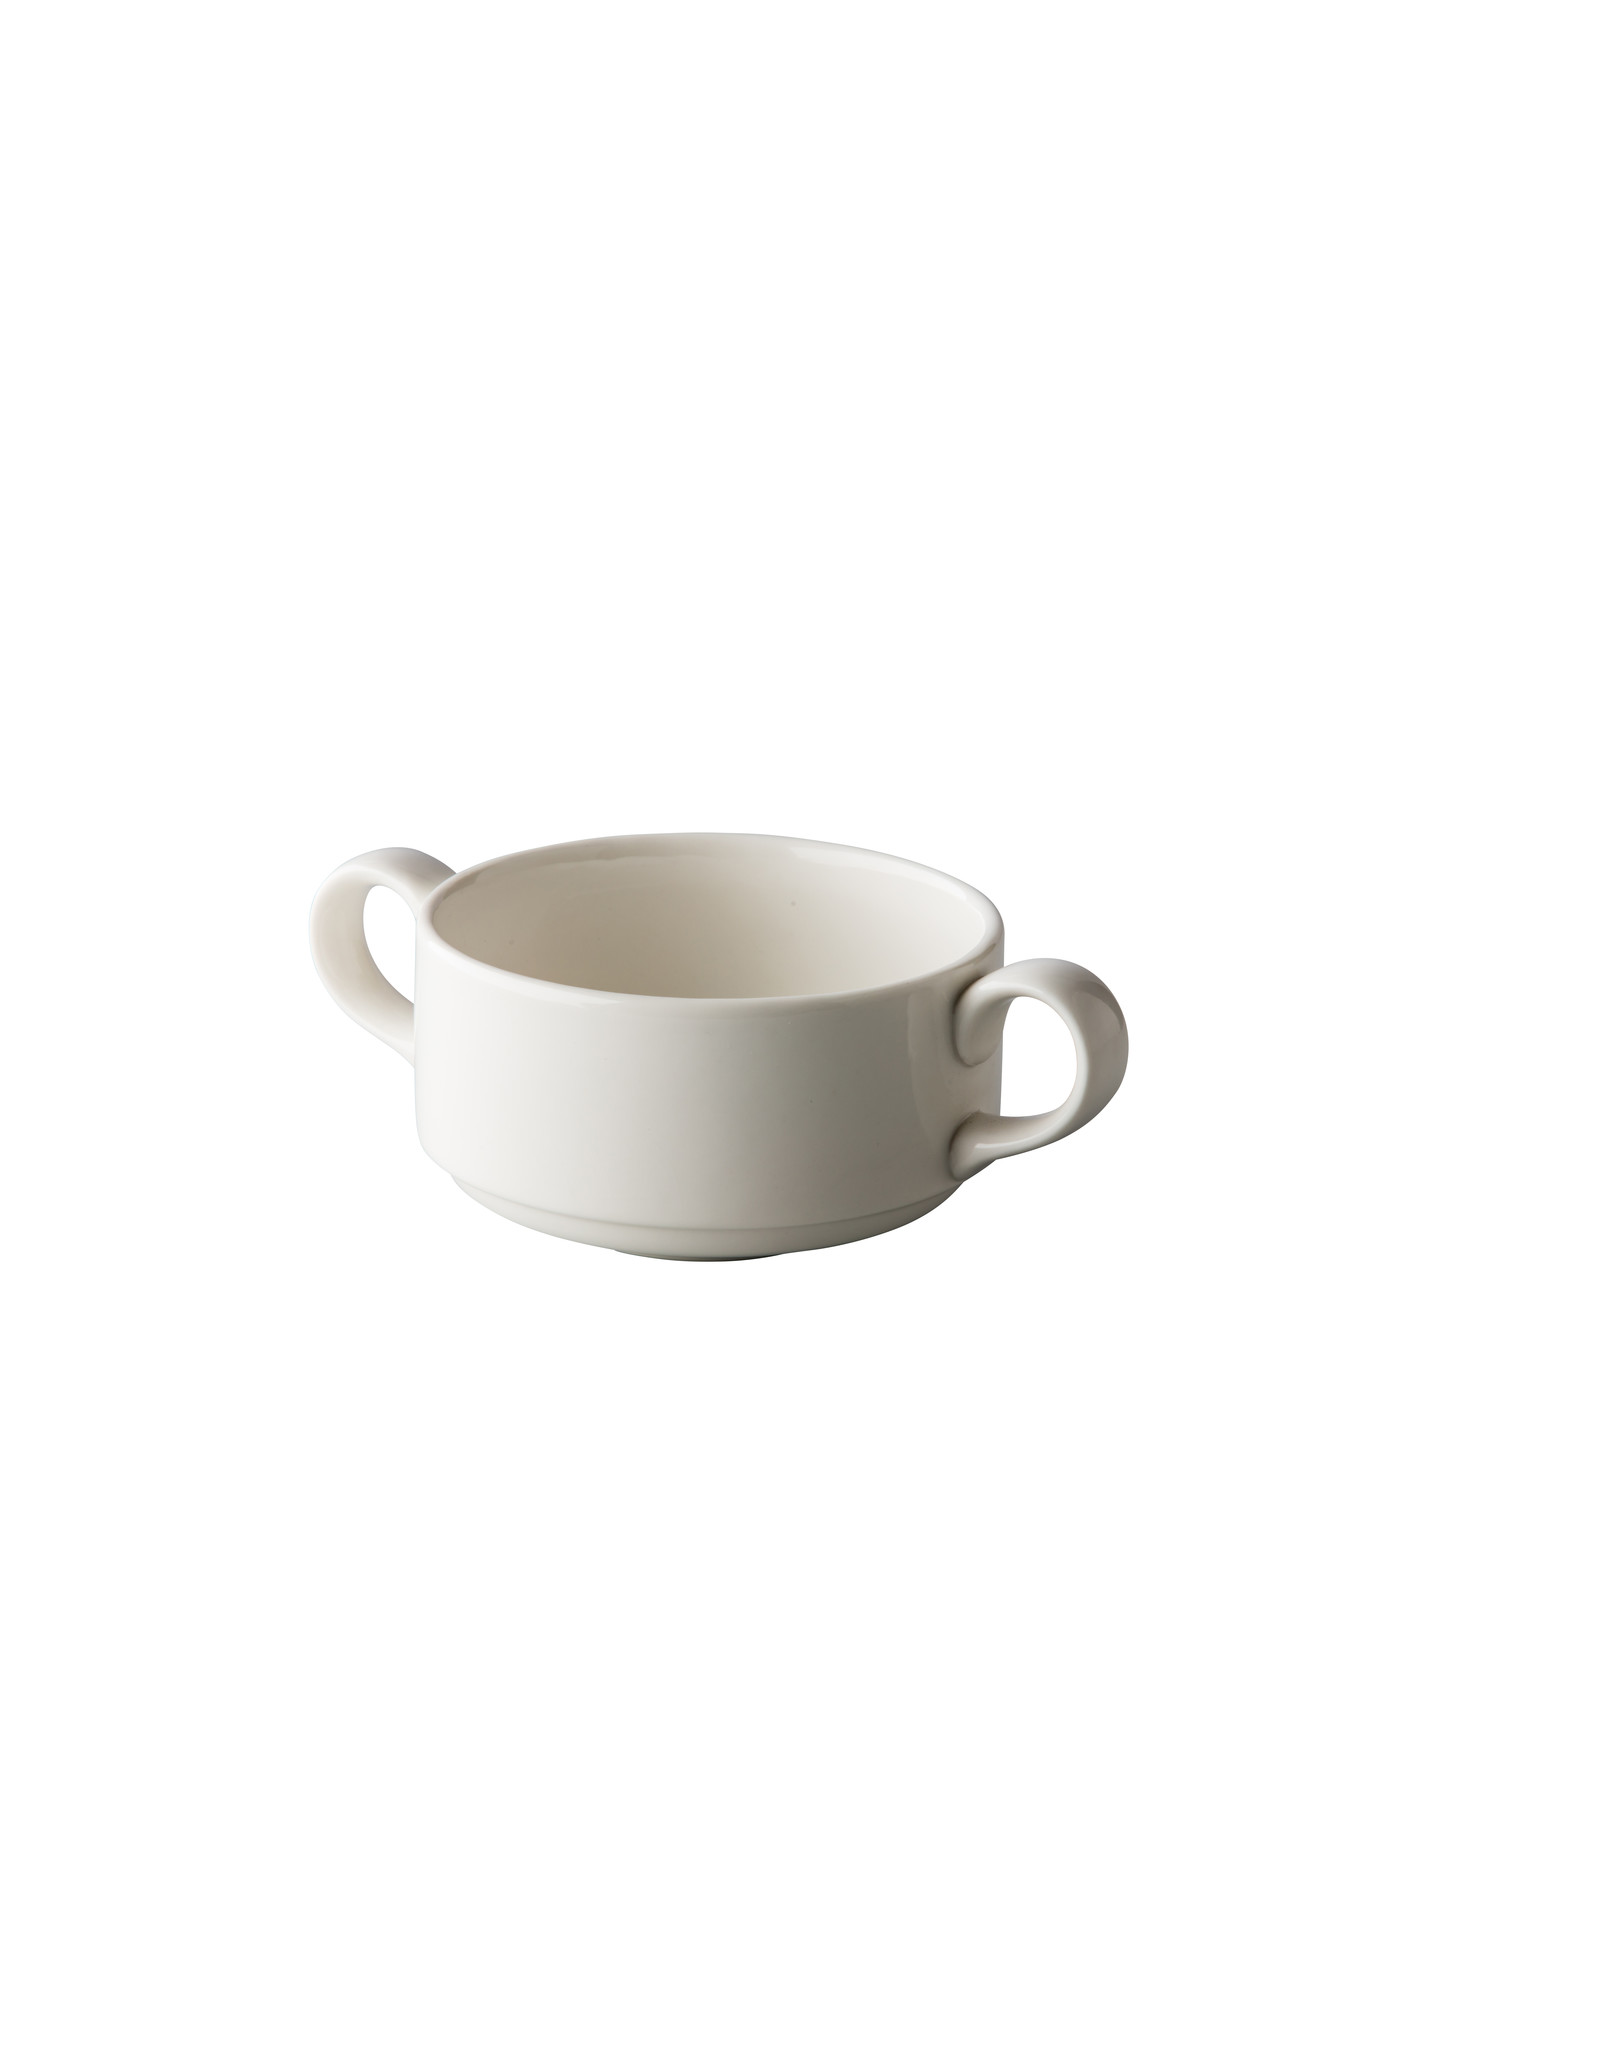 Stylepoint Q Performance Soup cup with handles 350ml